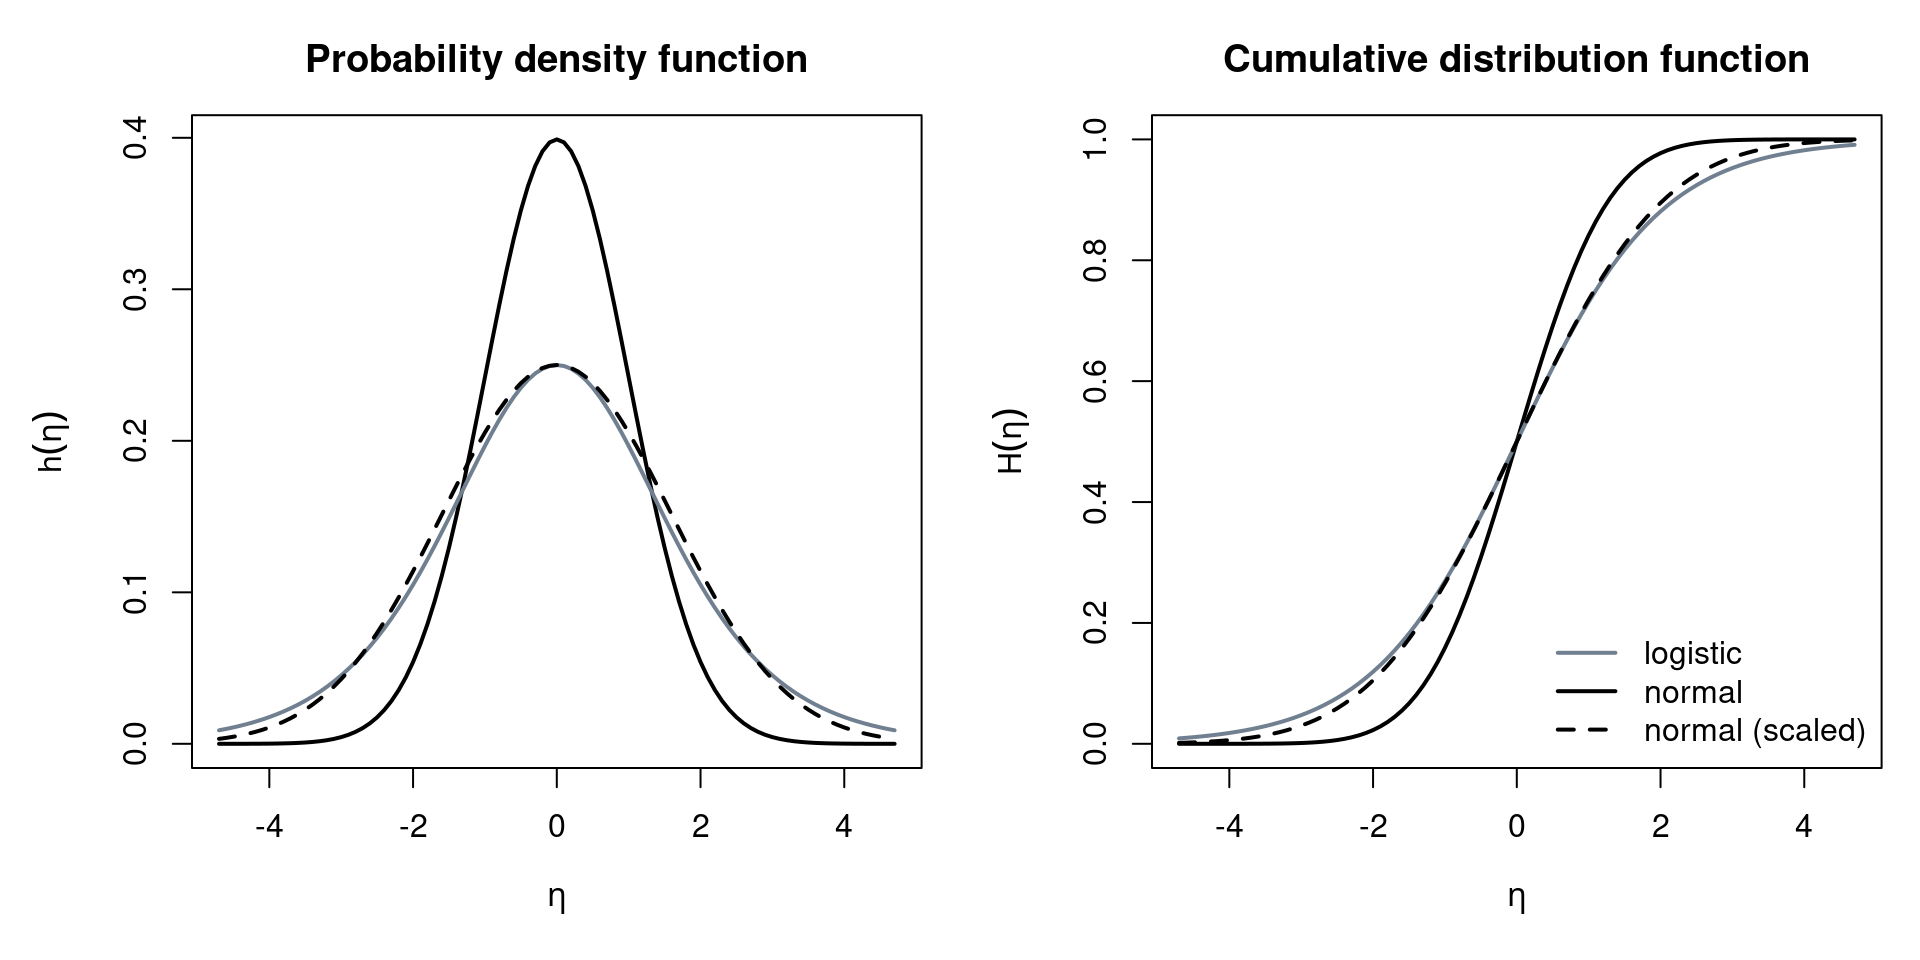 Visual Comparison of Normal and Logistic Distribution